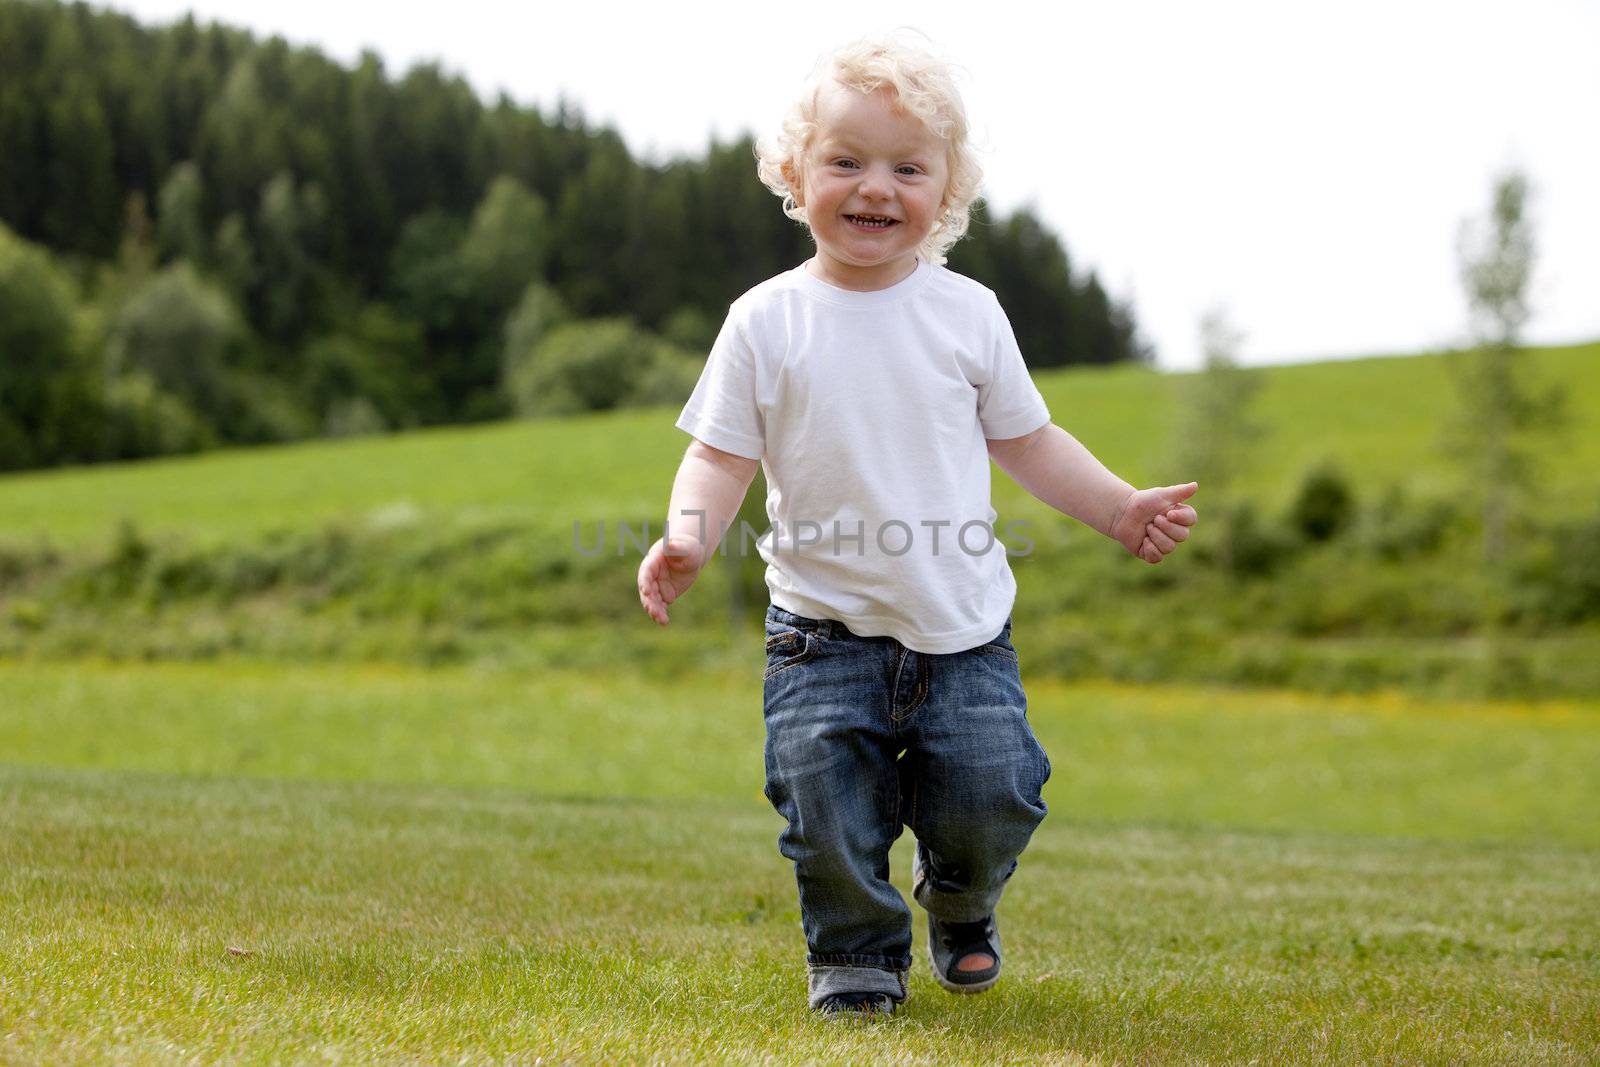 A cute smiling child running and playing outdoors in grass